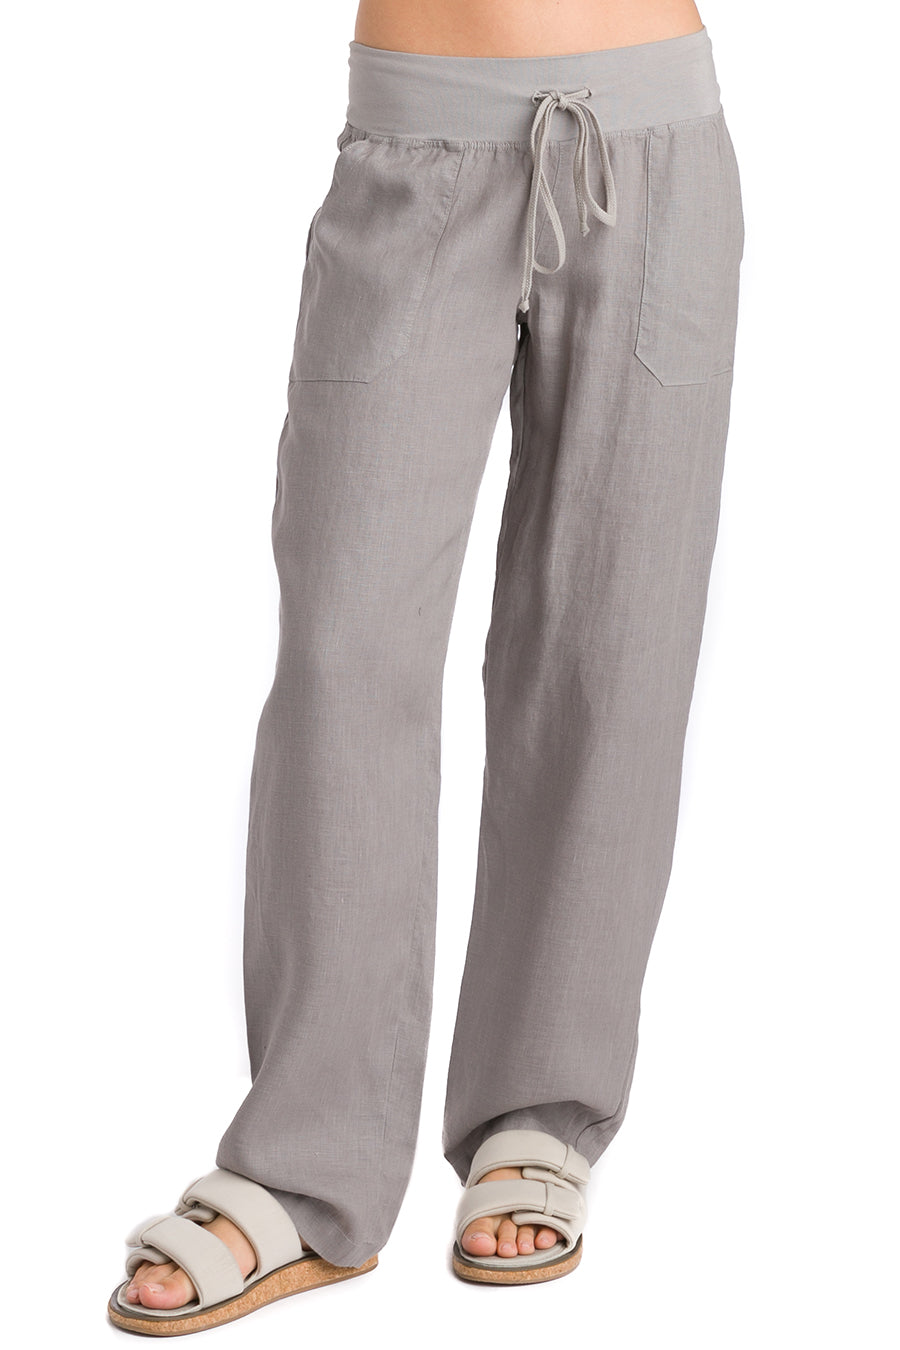 Hard Tail Forever Straight Up Linen Pants - Nickel - XL - 2024 ❤️  CooperativaShop ✓